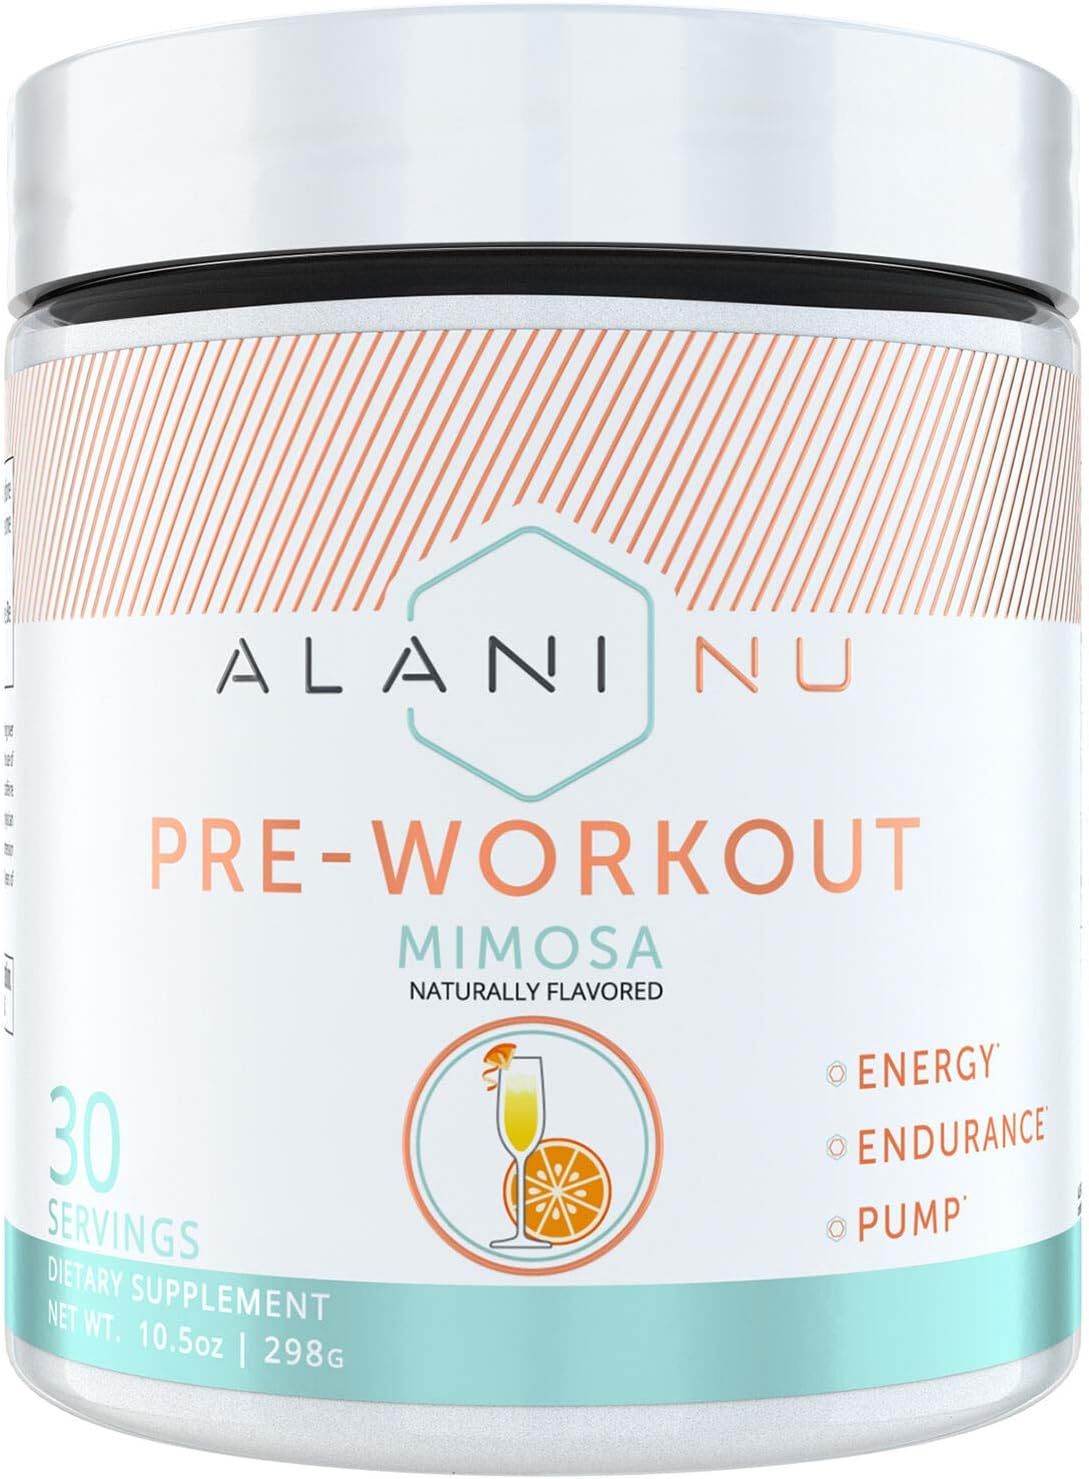 Alani Nu Pre-Workout Supplement Powder for Energy, Endurance, and Pump, Mimosa, 30 Servings | Amazon (US)